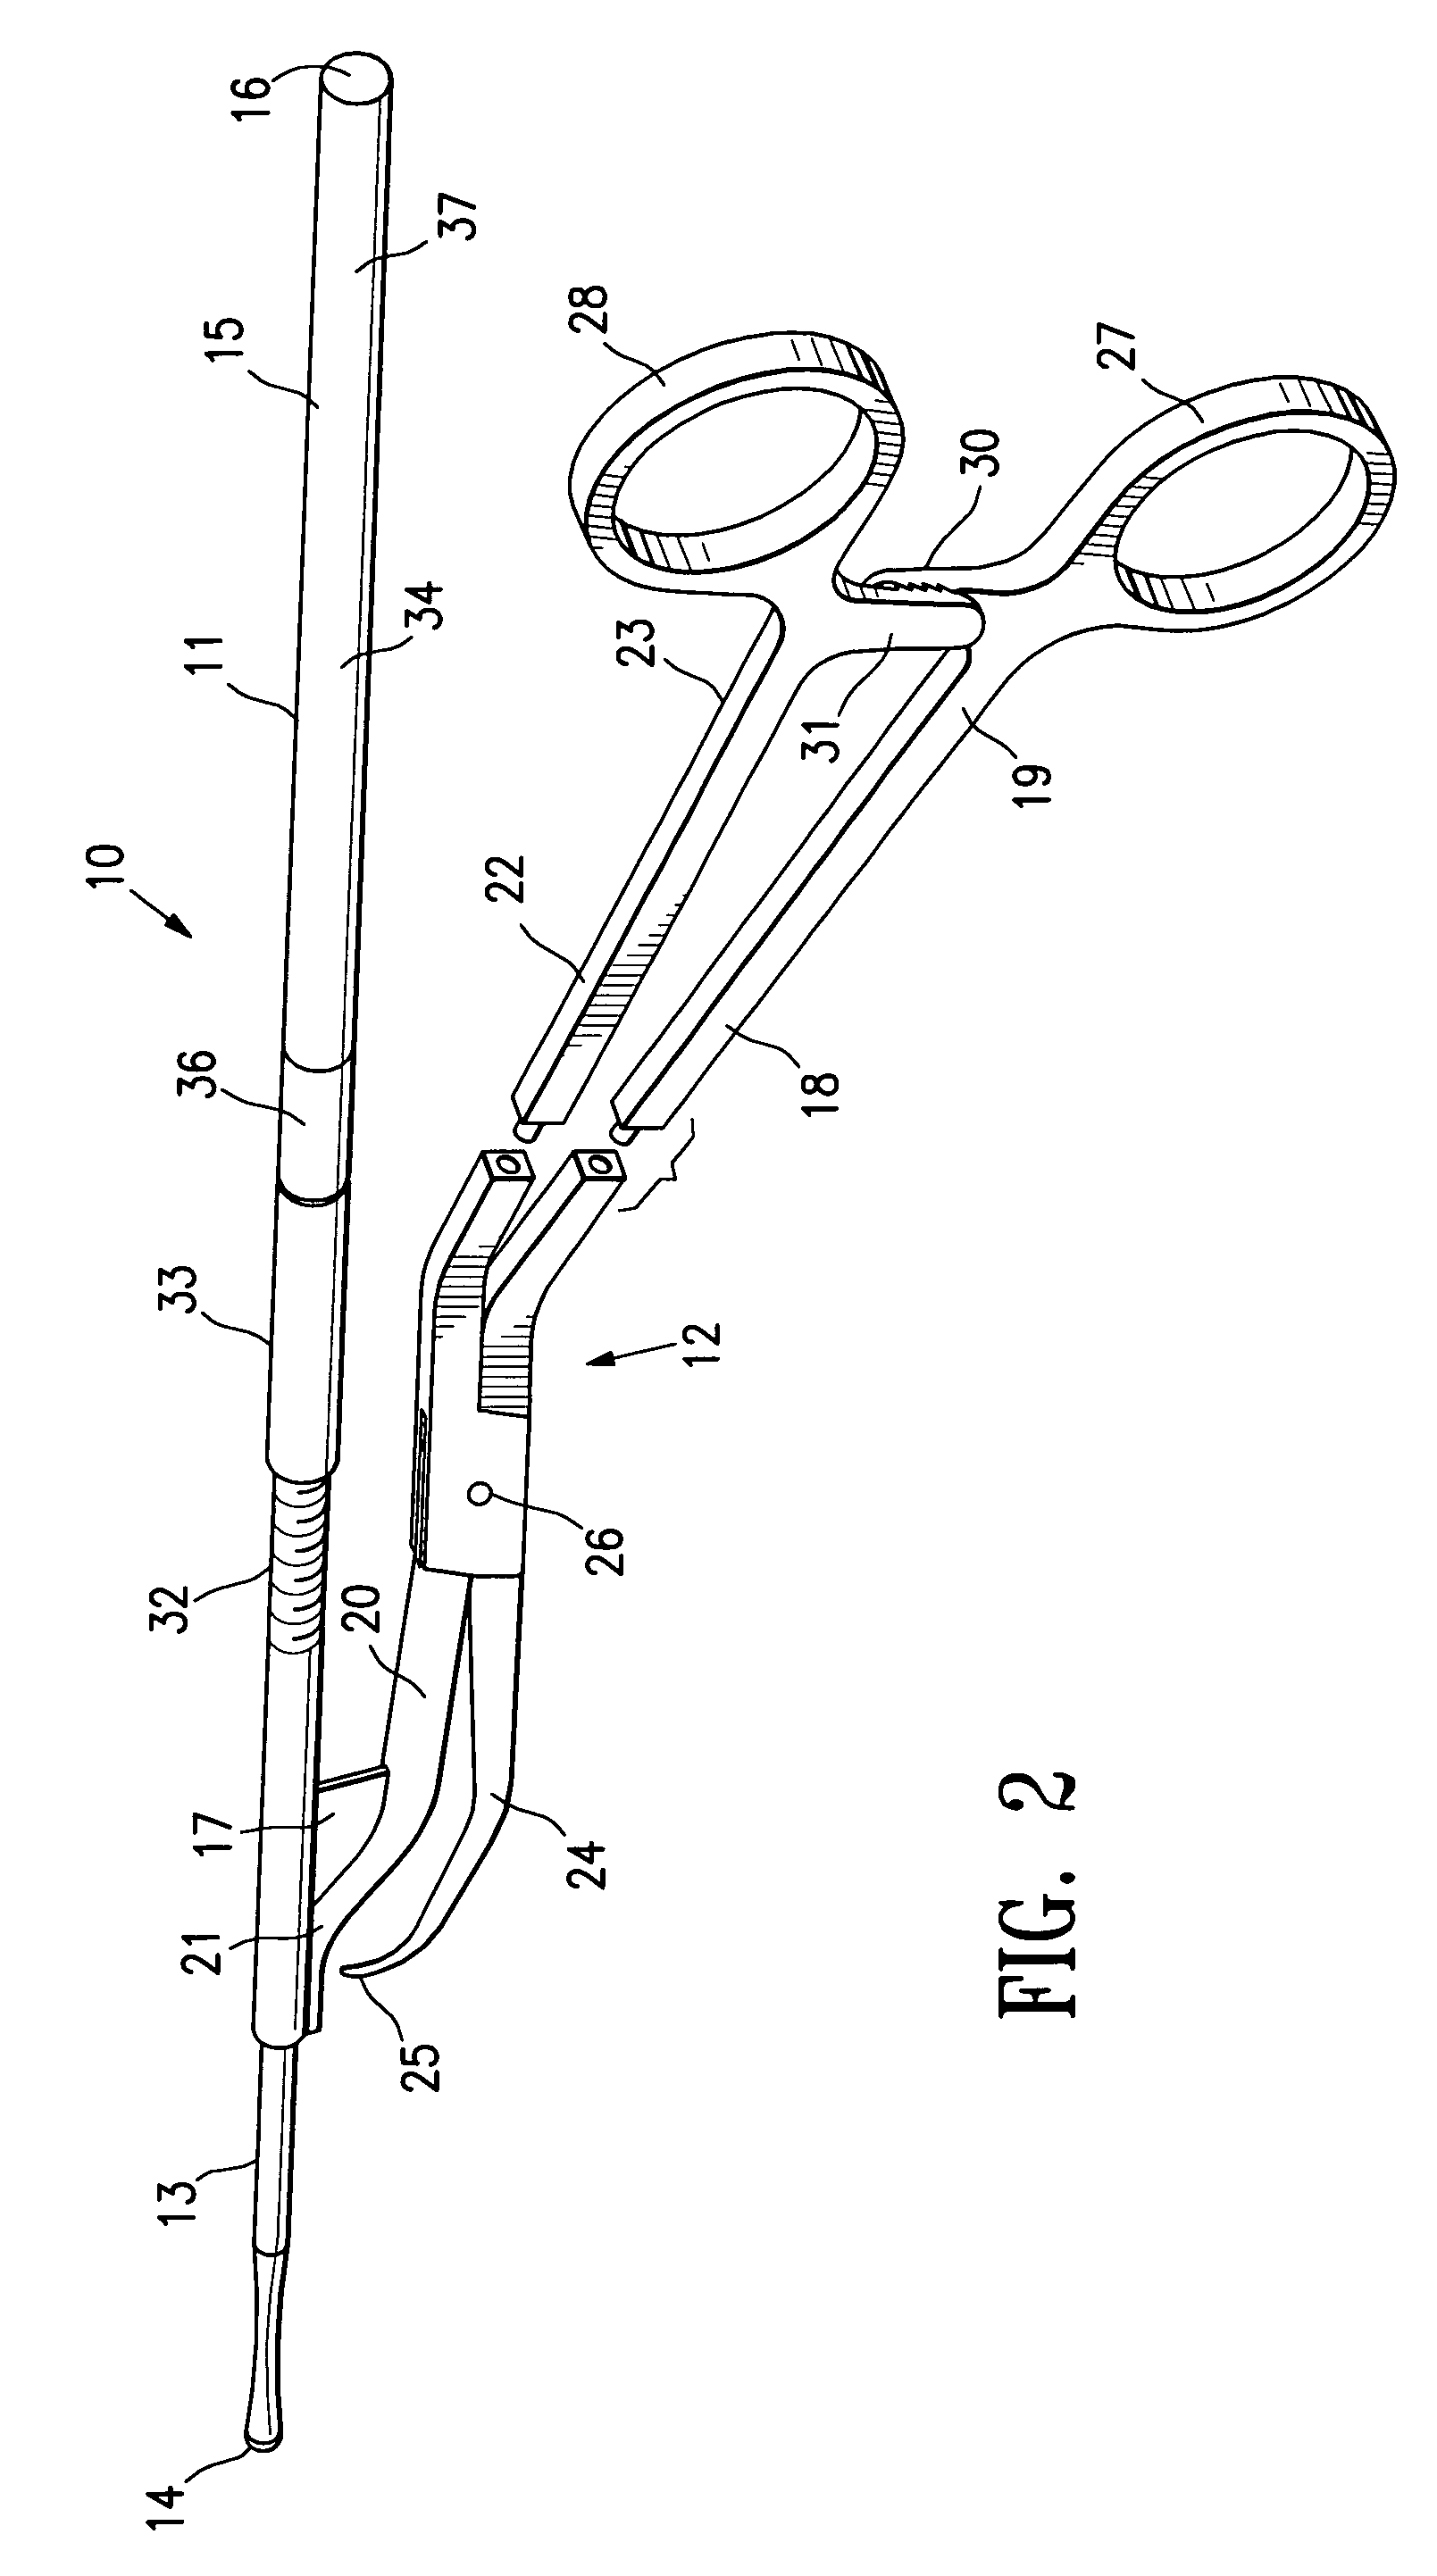 Tenaculum-like device for intravaginal instrument delivery